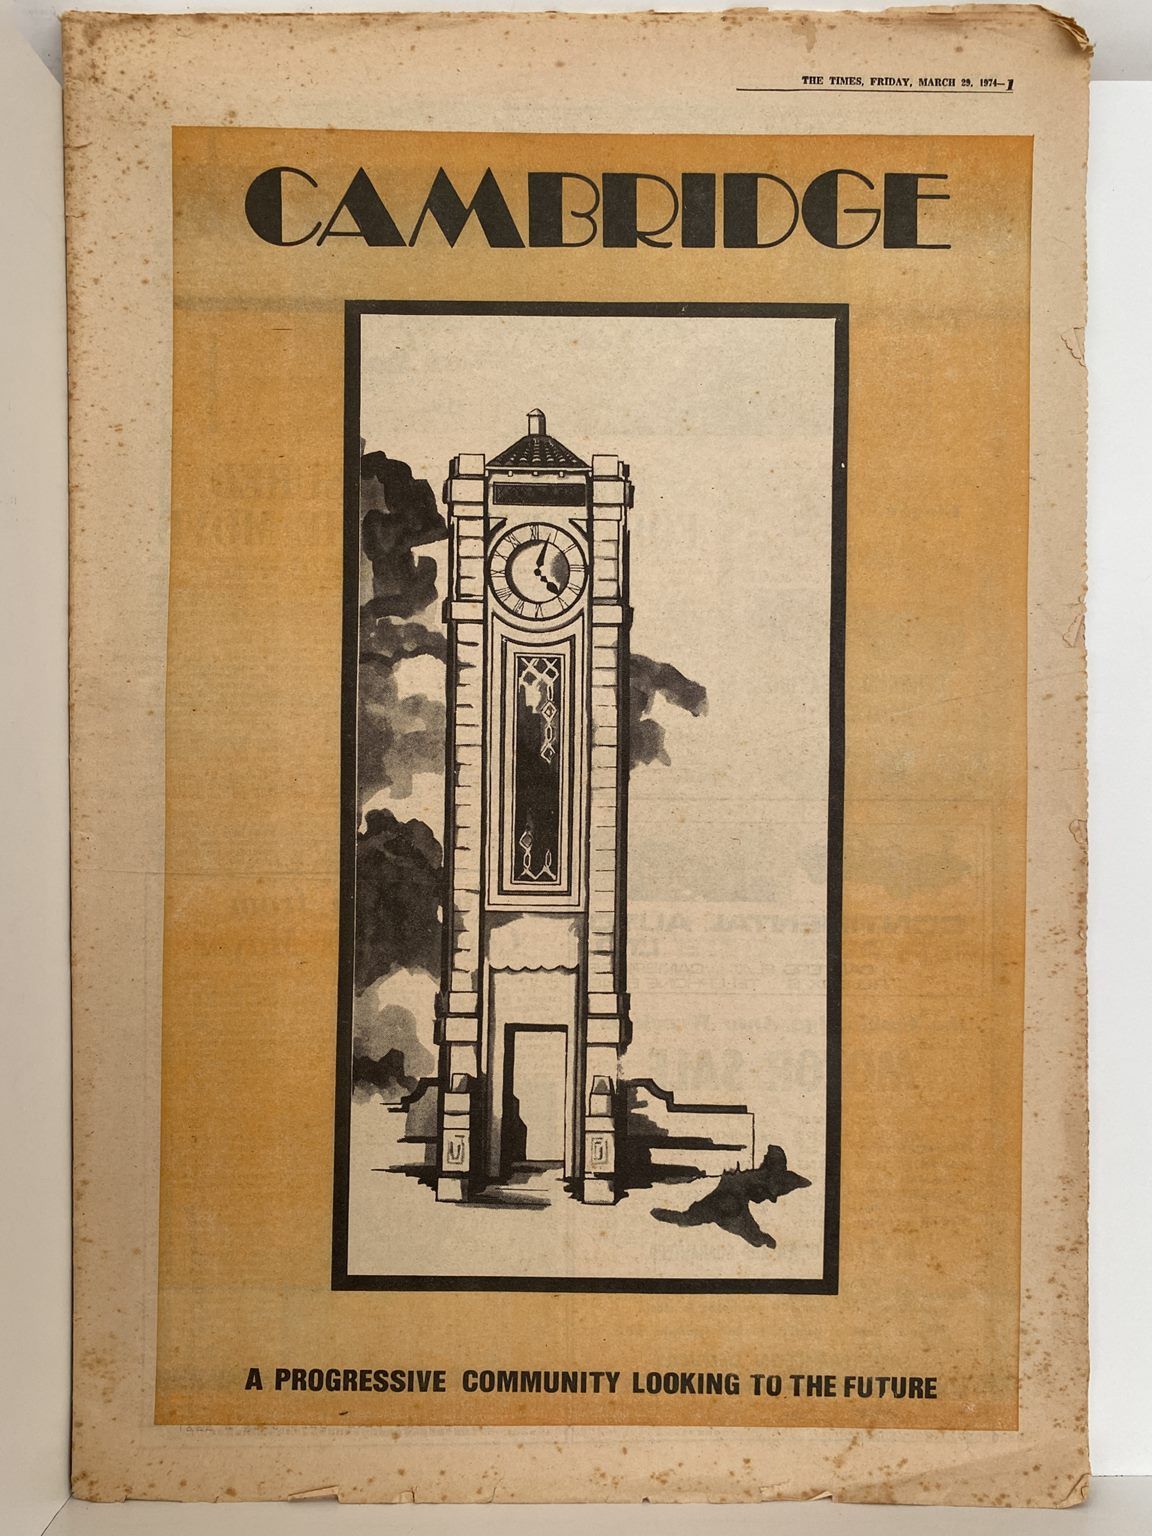 OLD NEWSPAPER: The Times, 29 March 1974 - Cambridge Special Feature